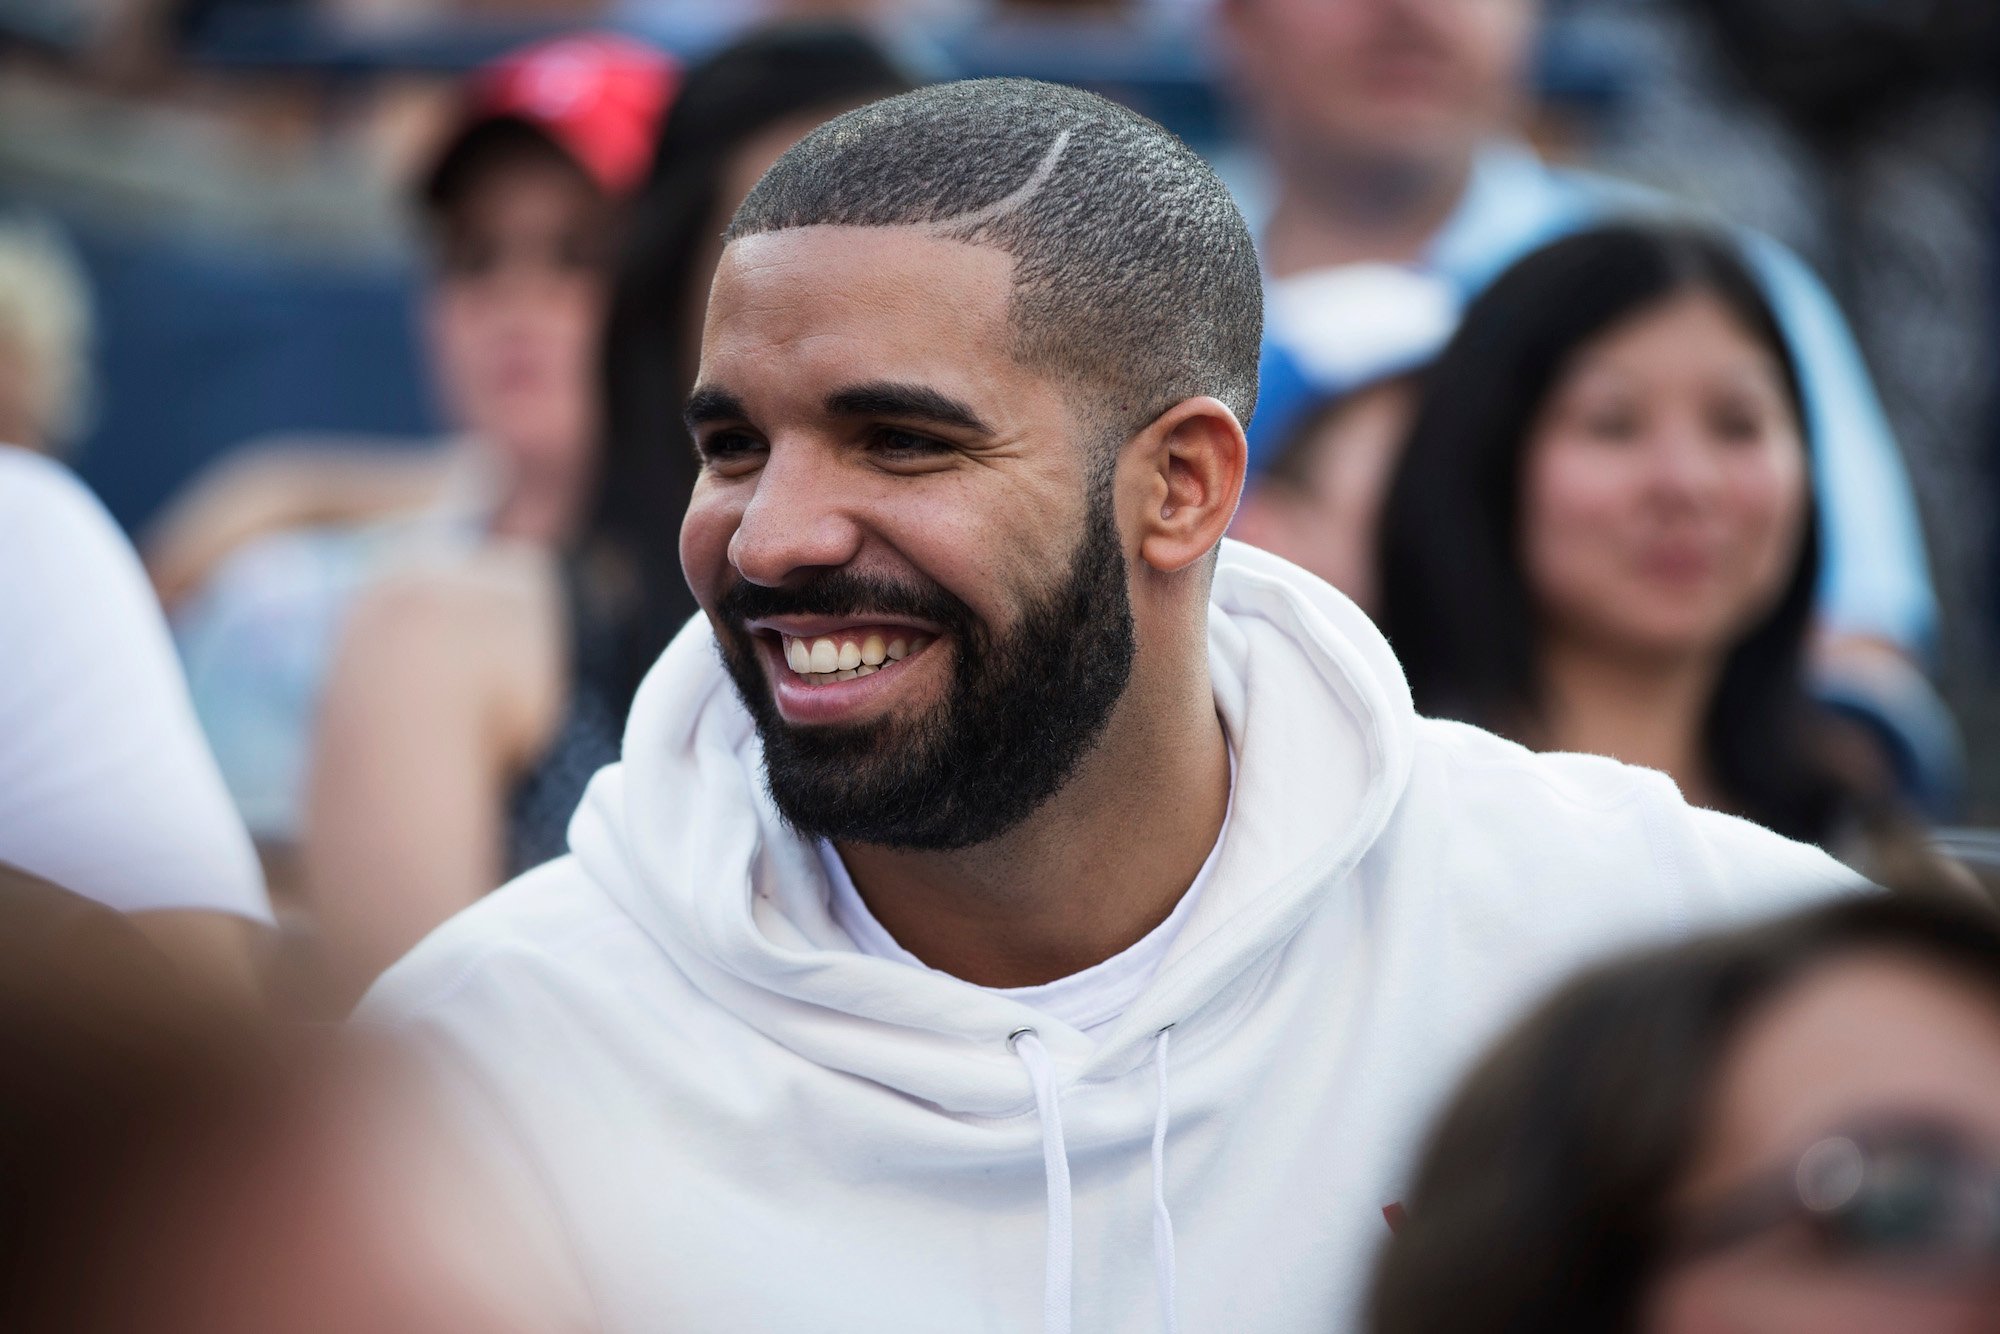 Drake, who was once linked to Serena Williams, smiling and wearing a white hoodie